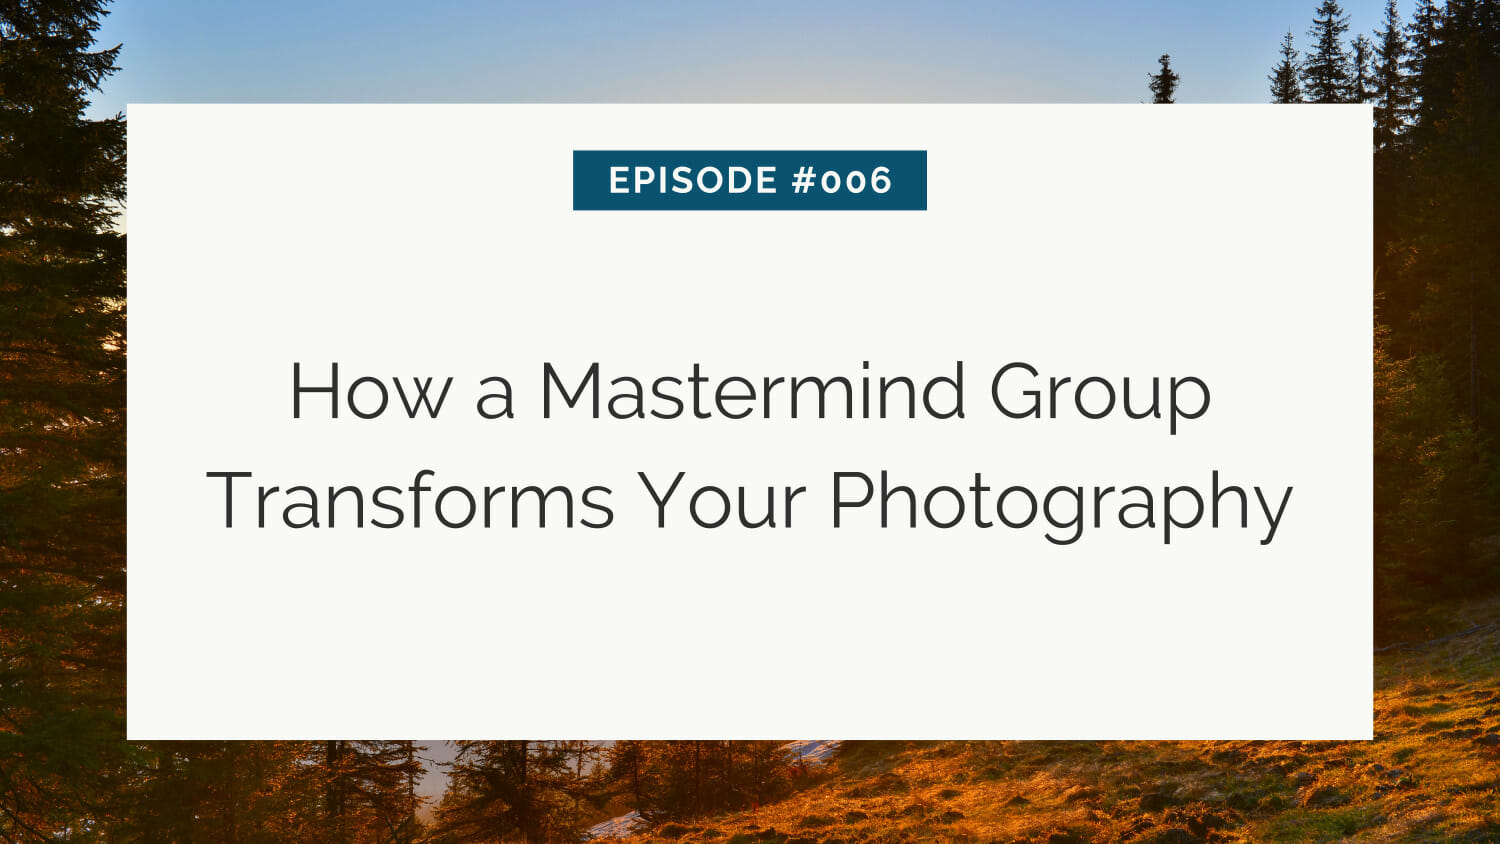 Title slide for episode #006 about the impact of a mastermind group on photography, set against a forest backdrop at sunset.